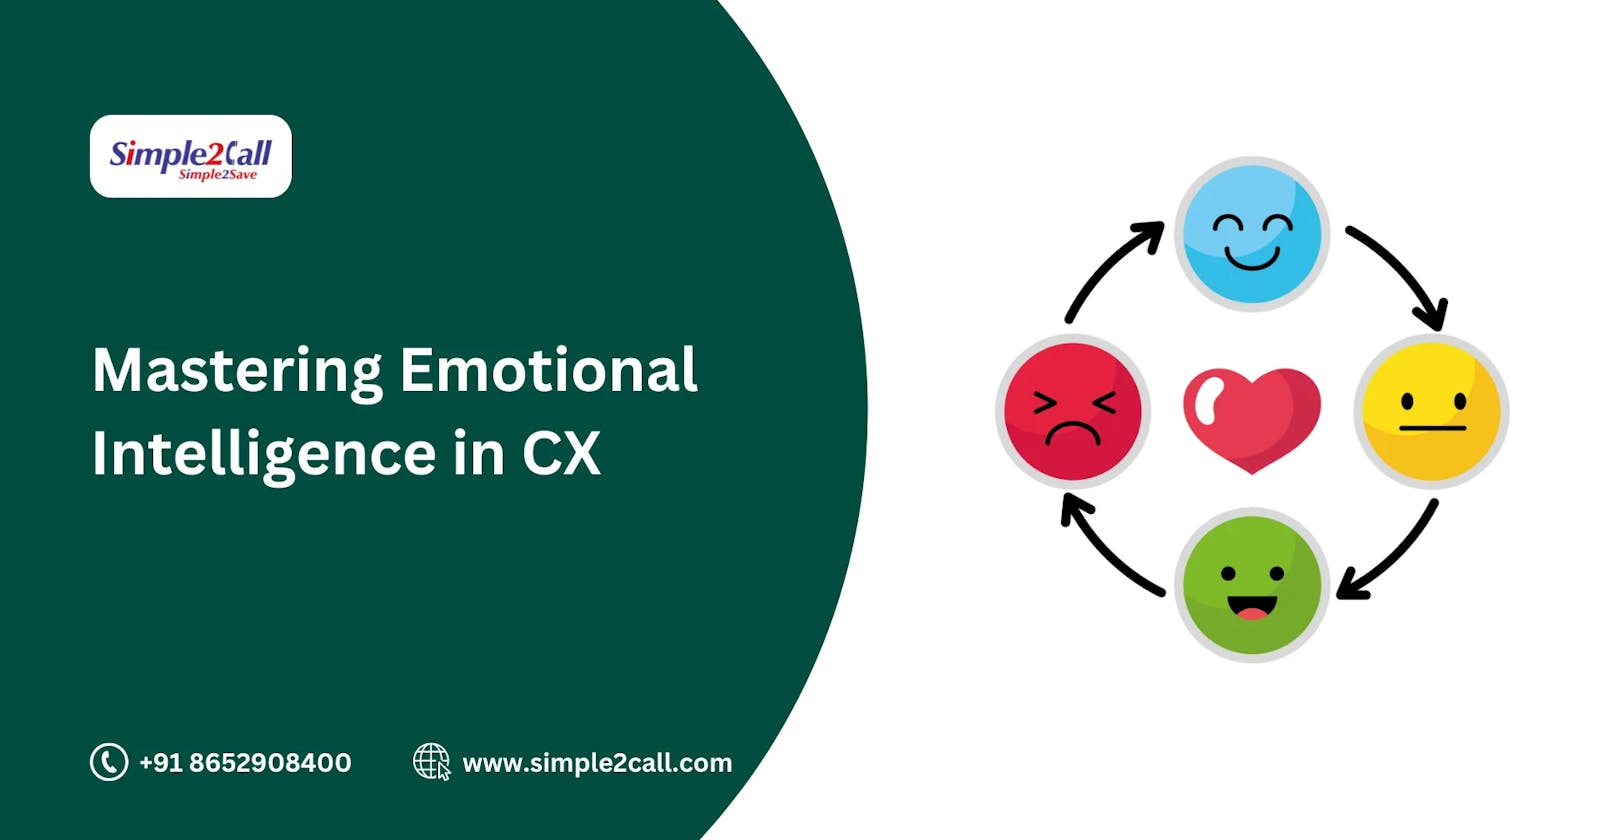 Mastering Emotional Intelligence in CX